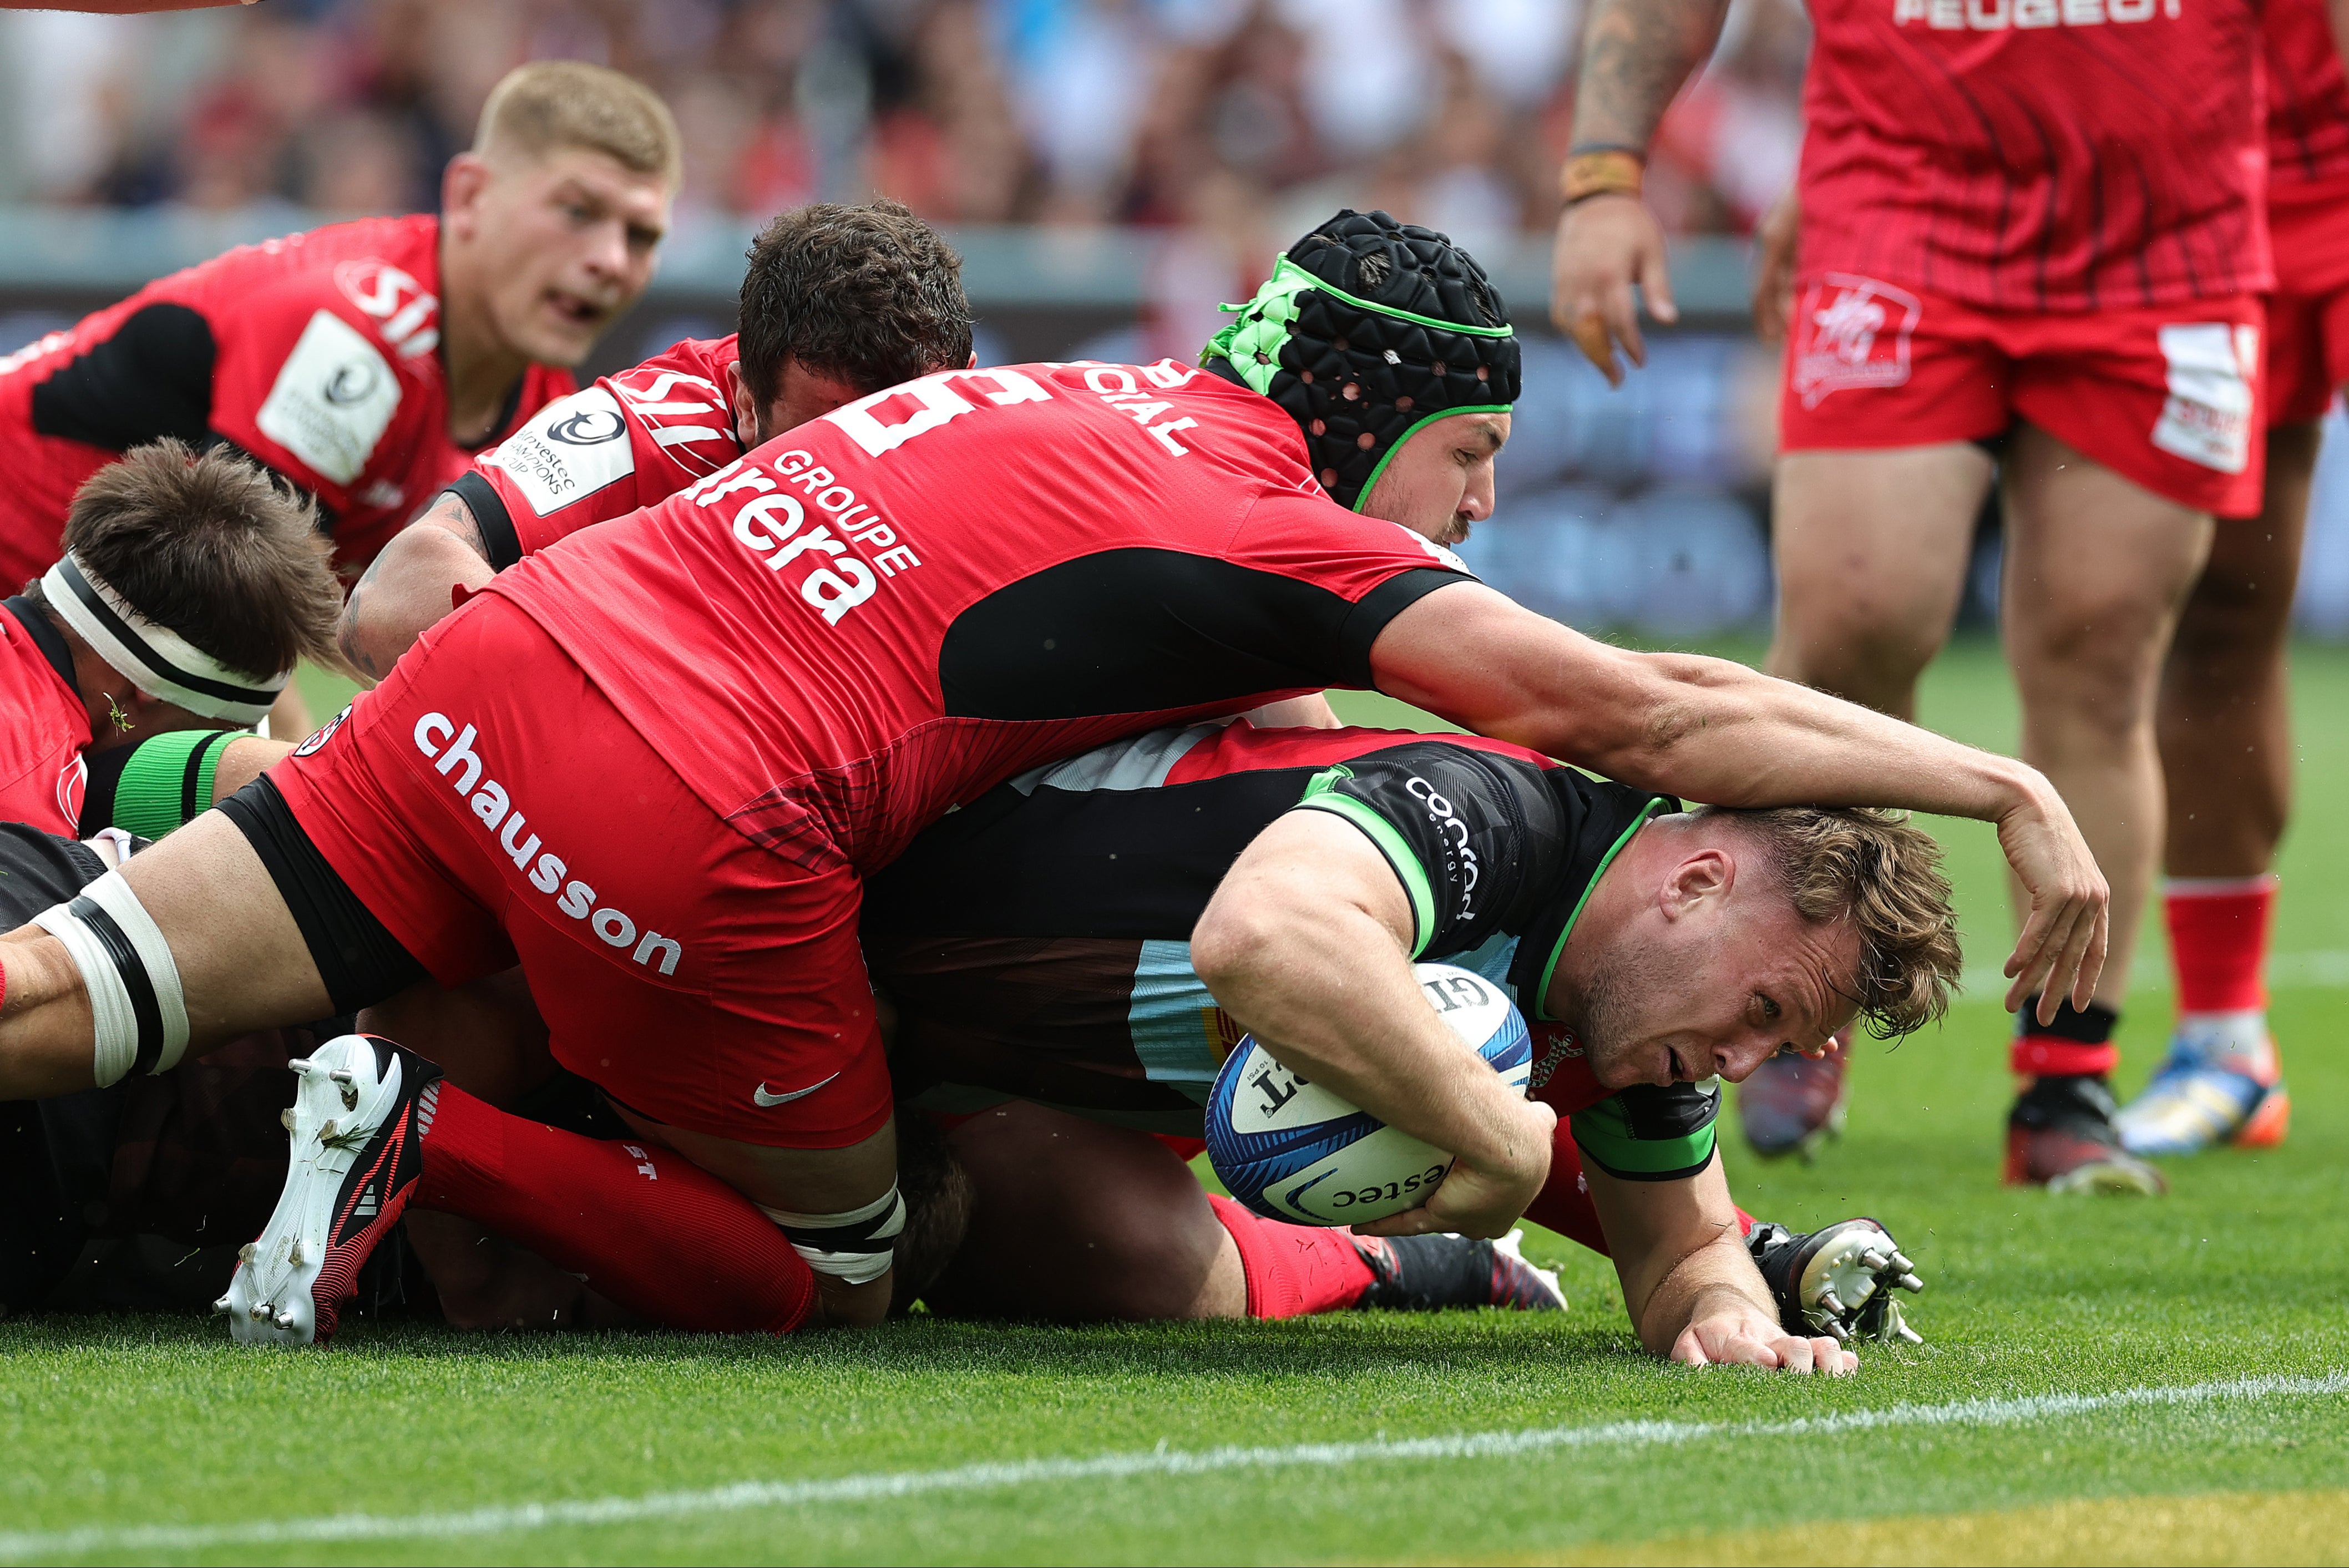 Harlequins fell short as Toulouse set up an encounter with Leinster later in May